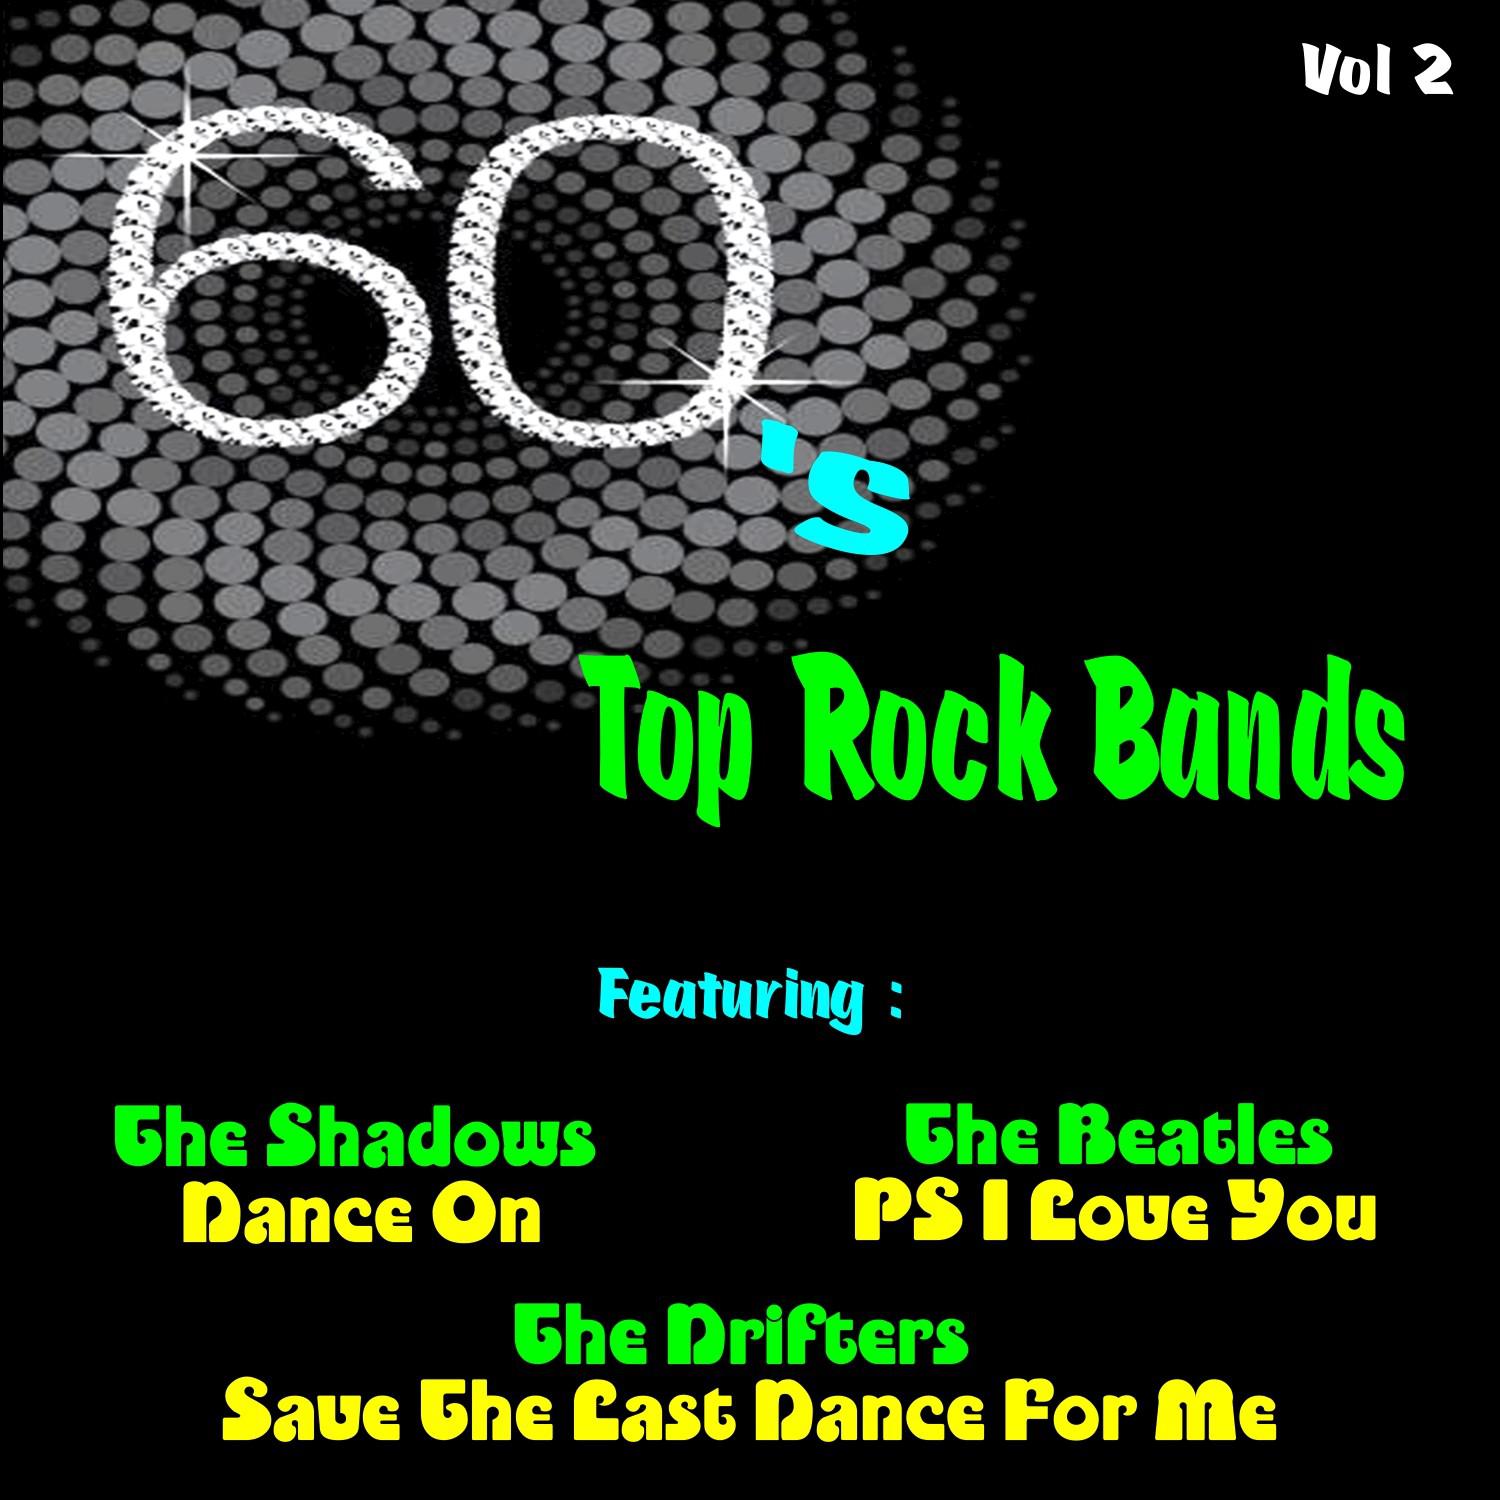 Top Rock Bands from the Sixties, Vol. 2